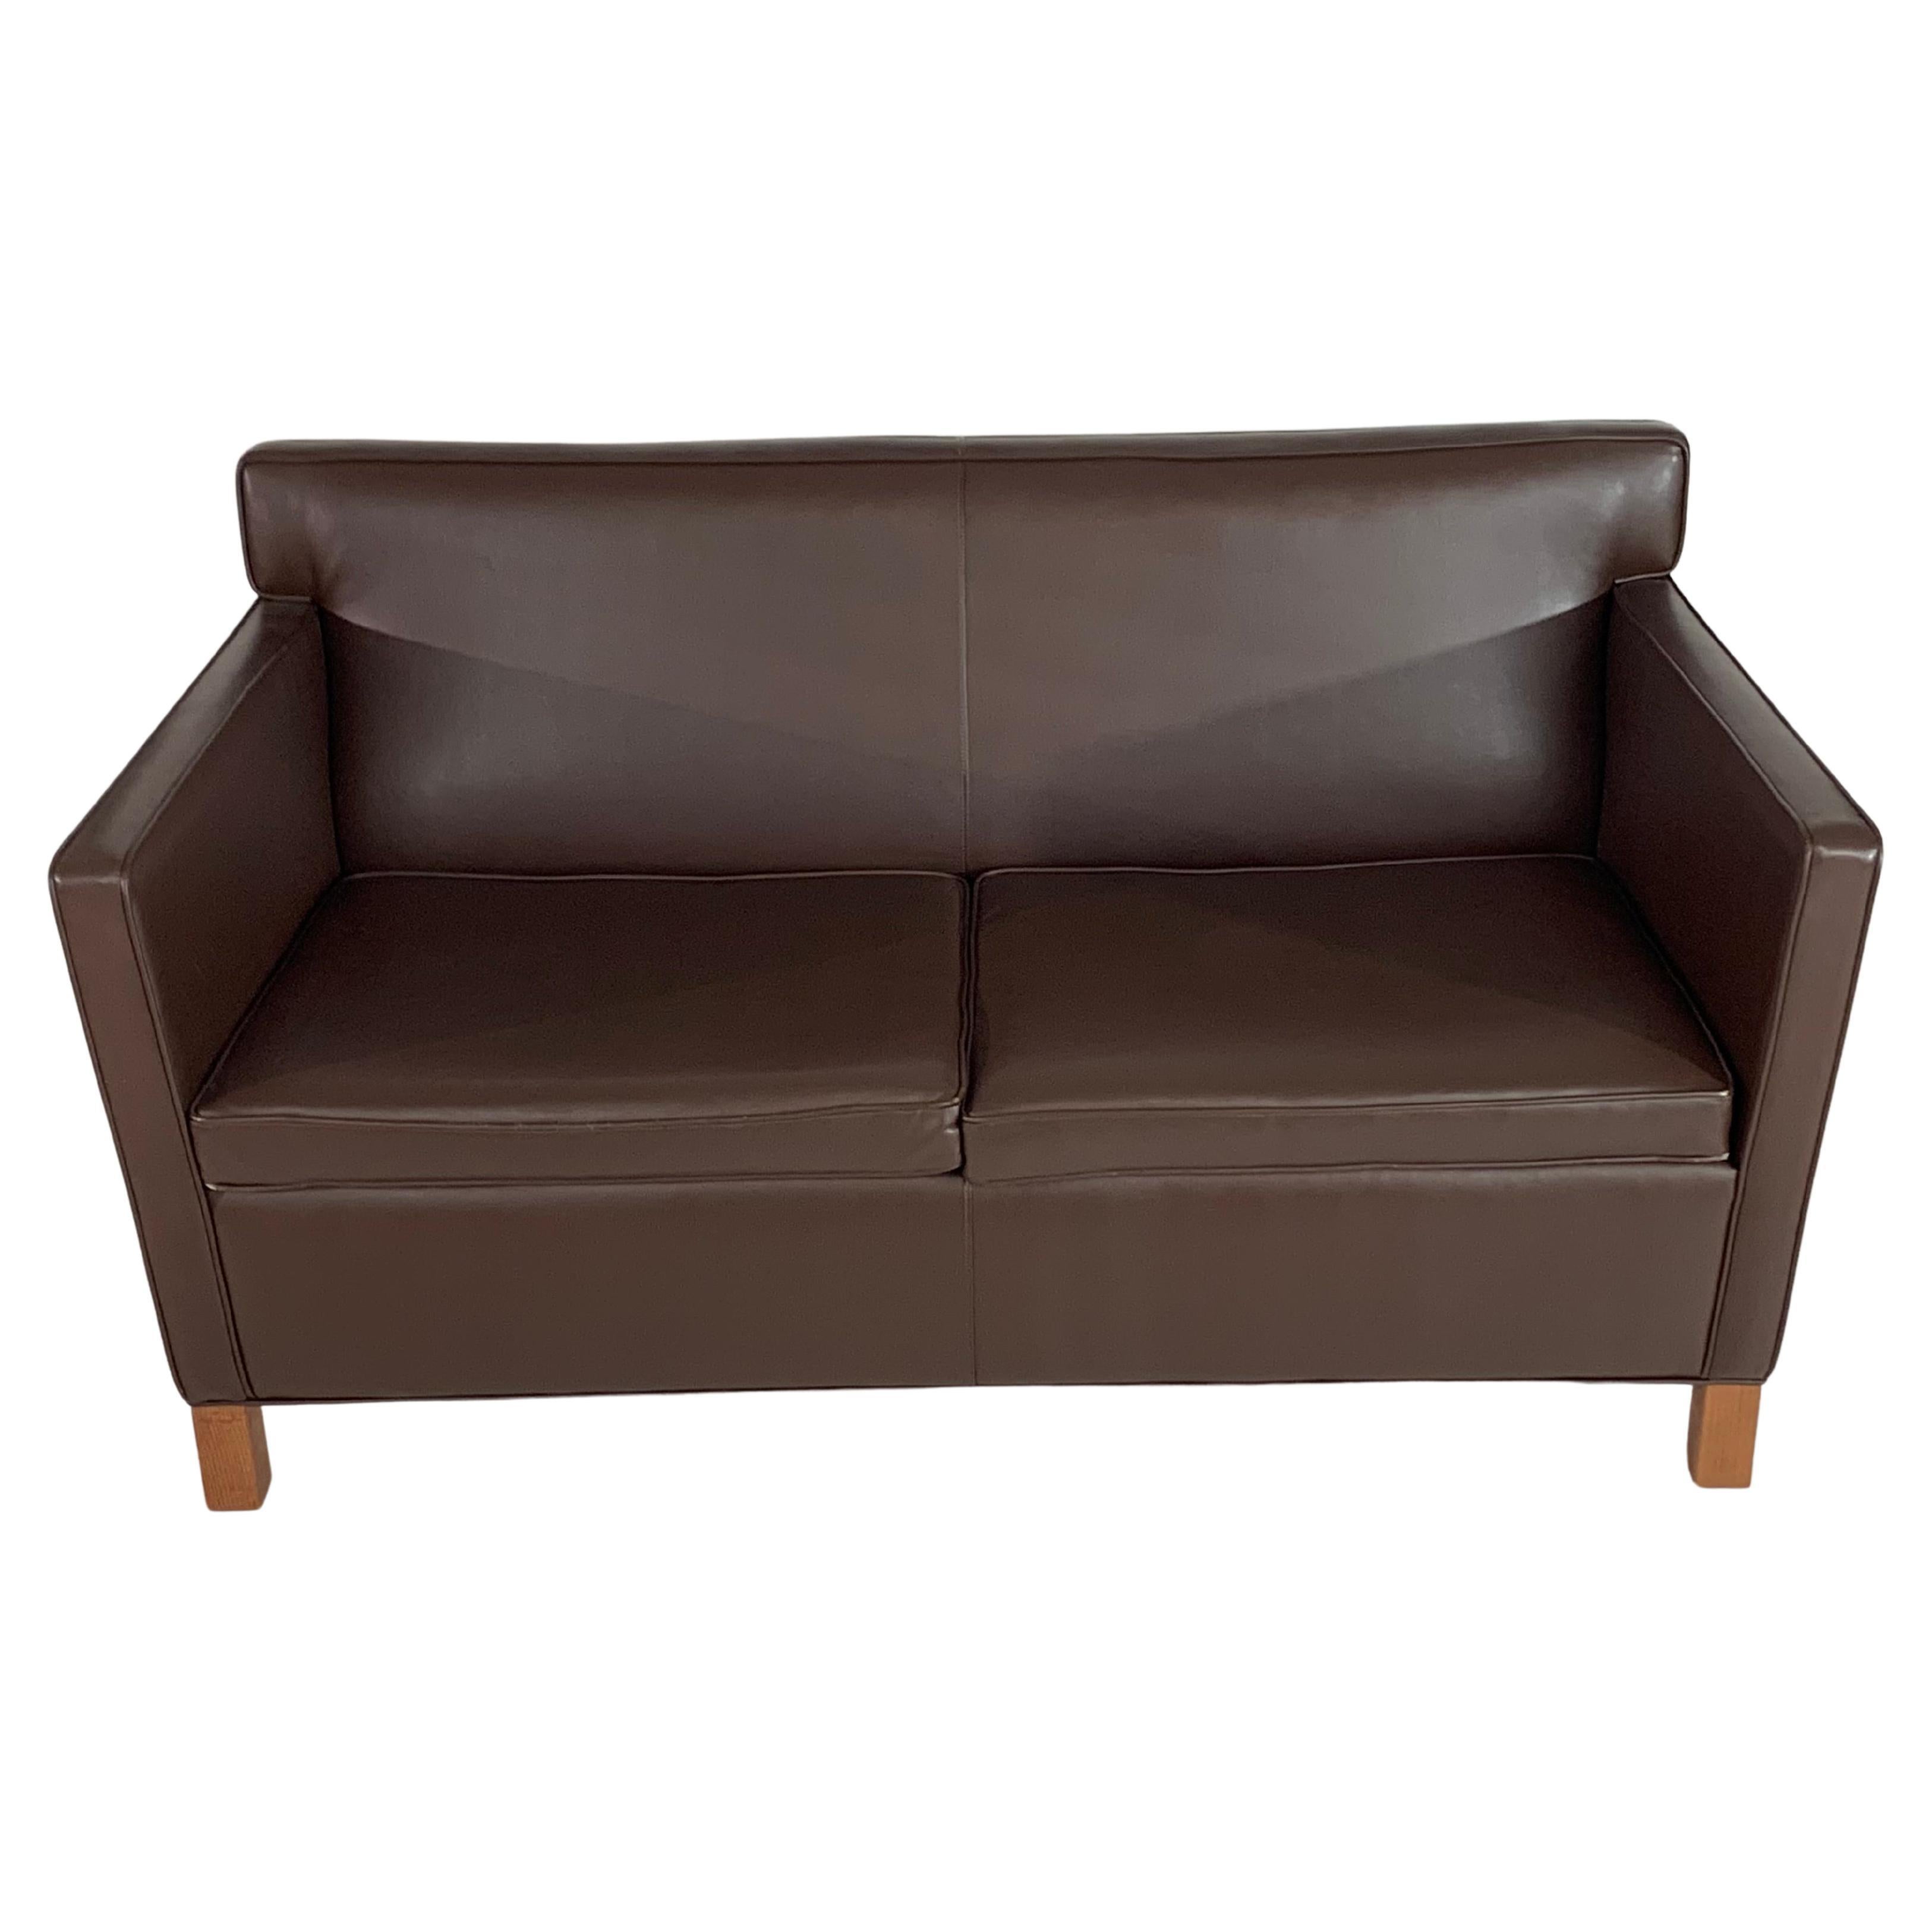 Contemporary Ludwig Mies van der Rohe Krefeld Settee or Sofa in Dark Brown Leather for Knoll For Sale